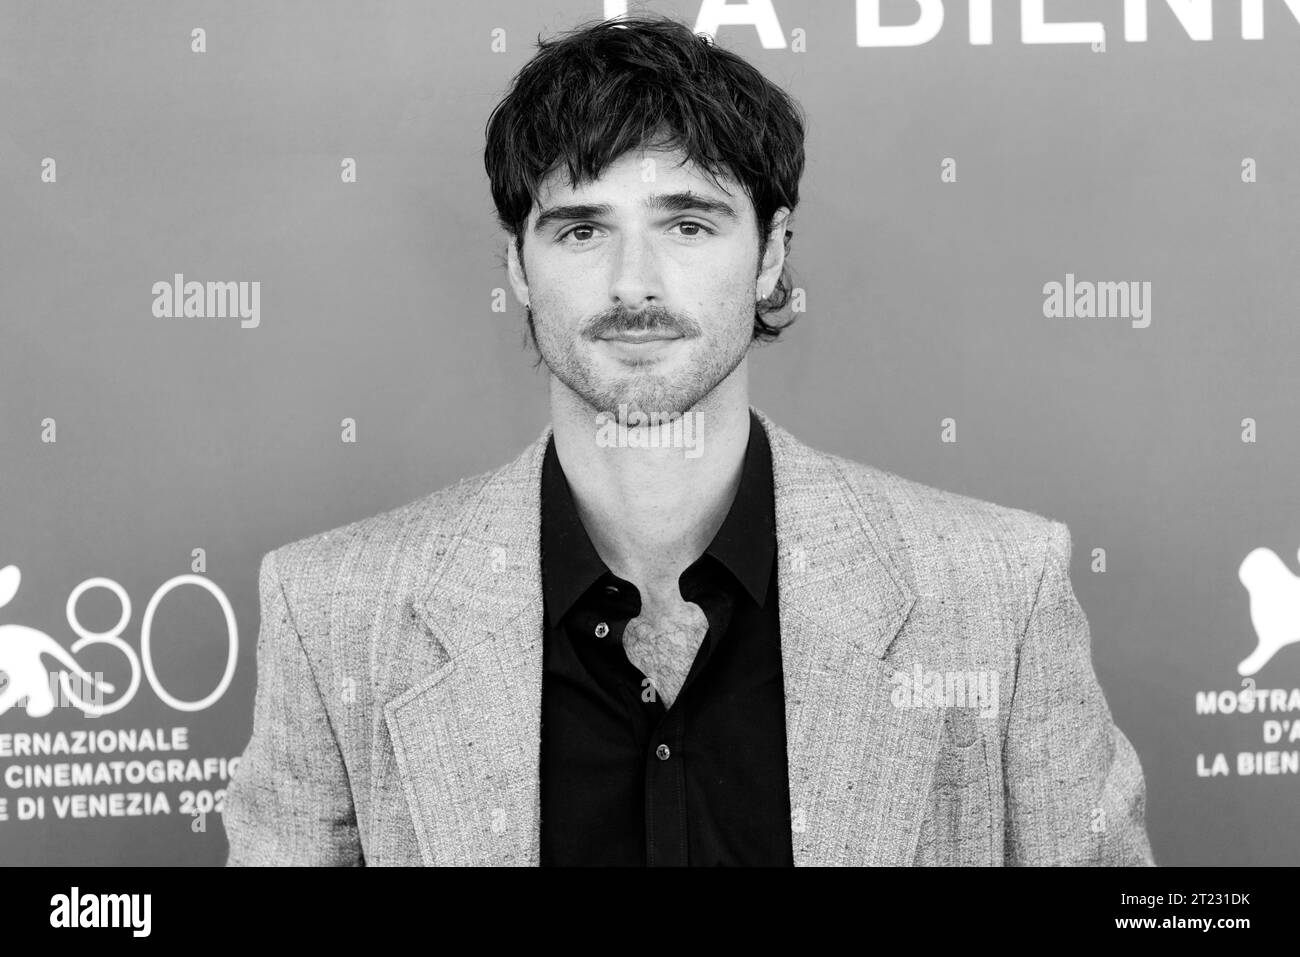 VENICE, ITALY - SEPTEMBER 04: Jacob Elordi attends the photo-call for the movie 'Priscilla' at the 80th Venice International Film Festival on Septembe Stock Photo